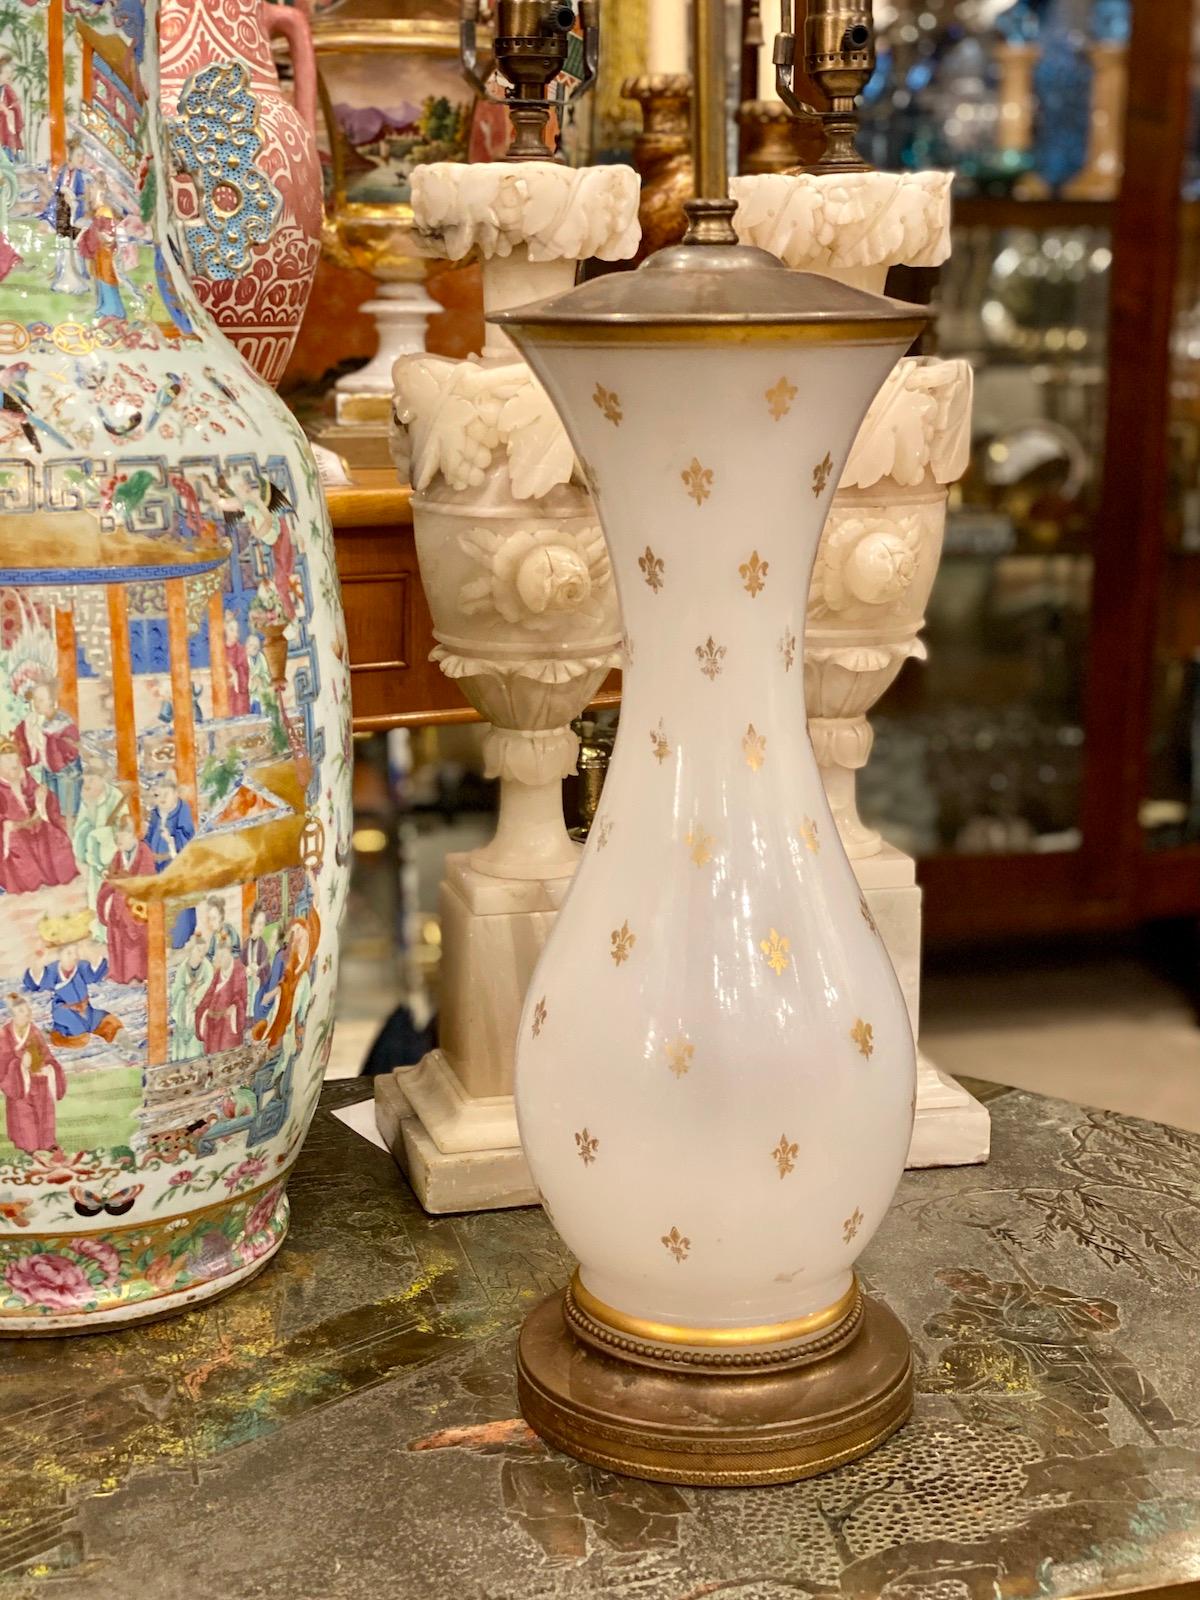 A circa 1920's French opaline glass table lamp with gilt Fleur de Lis details.

Measurements:
Height of body: 18